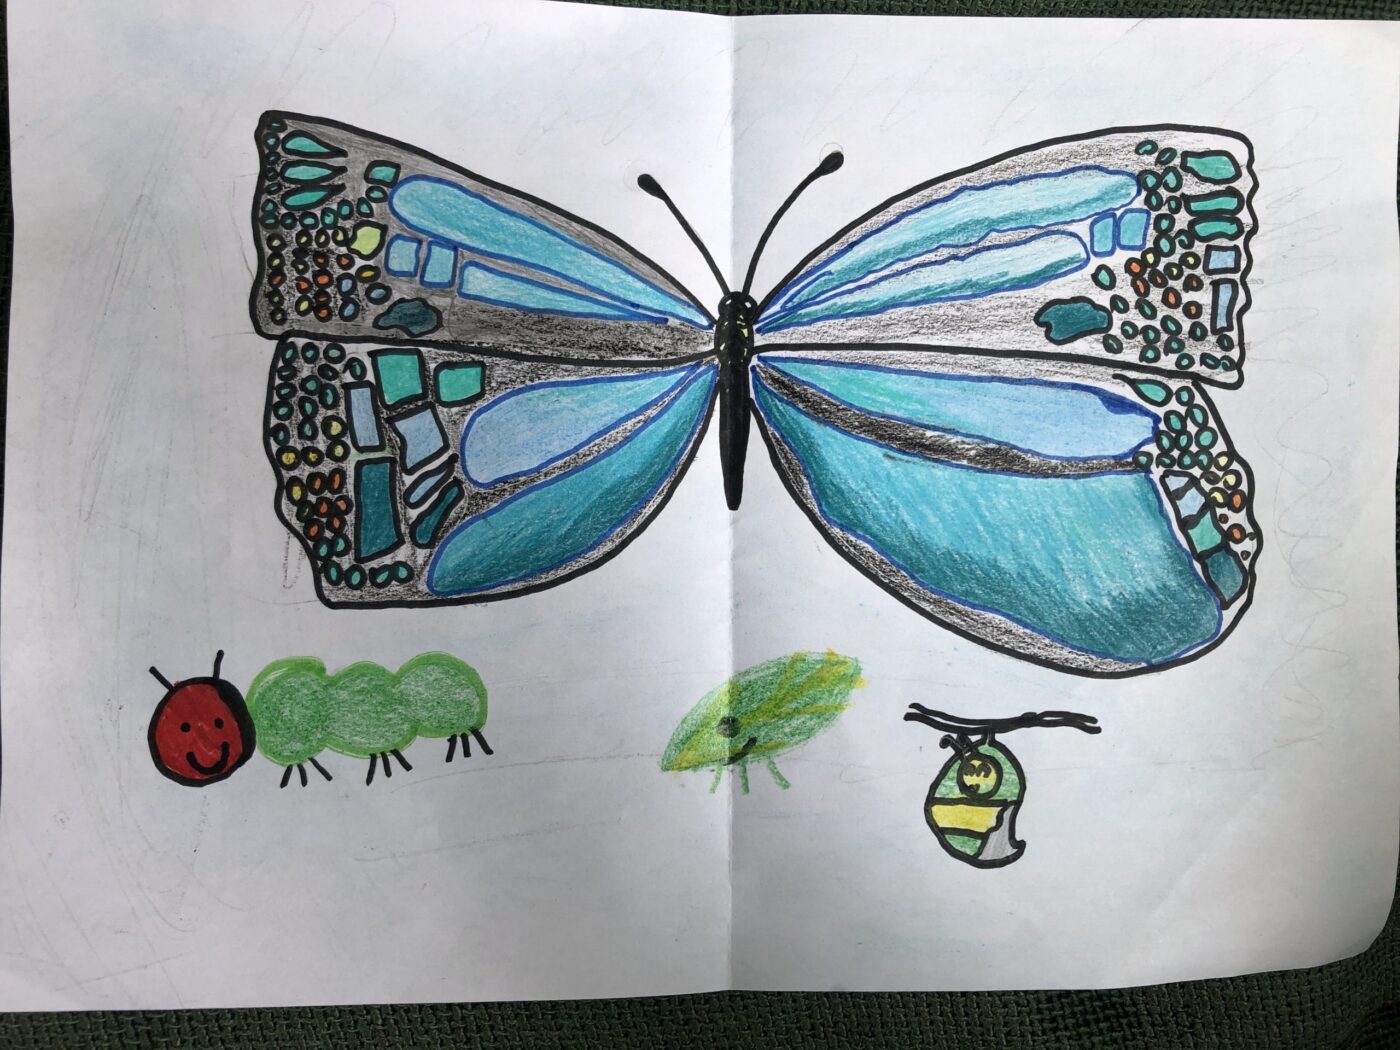 Life Style by Gustavo Juvenato, Highly Commended in age 3-7 category, Insect Week 2022 art competition